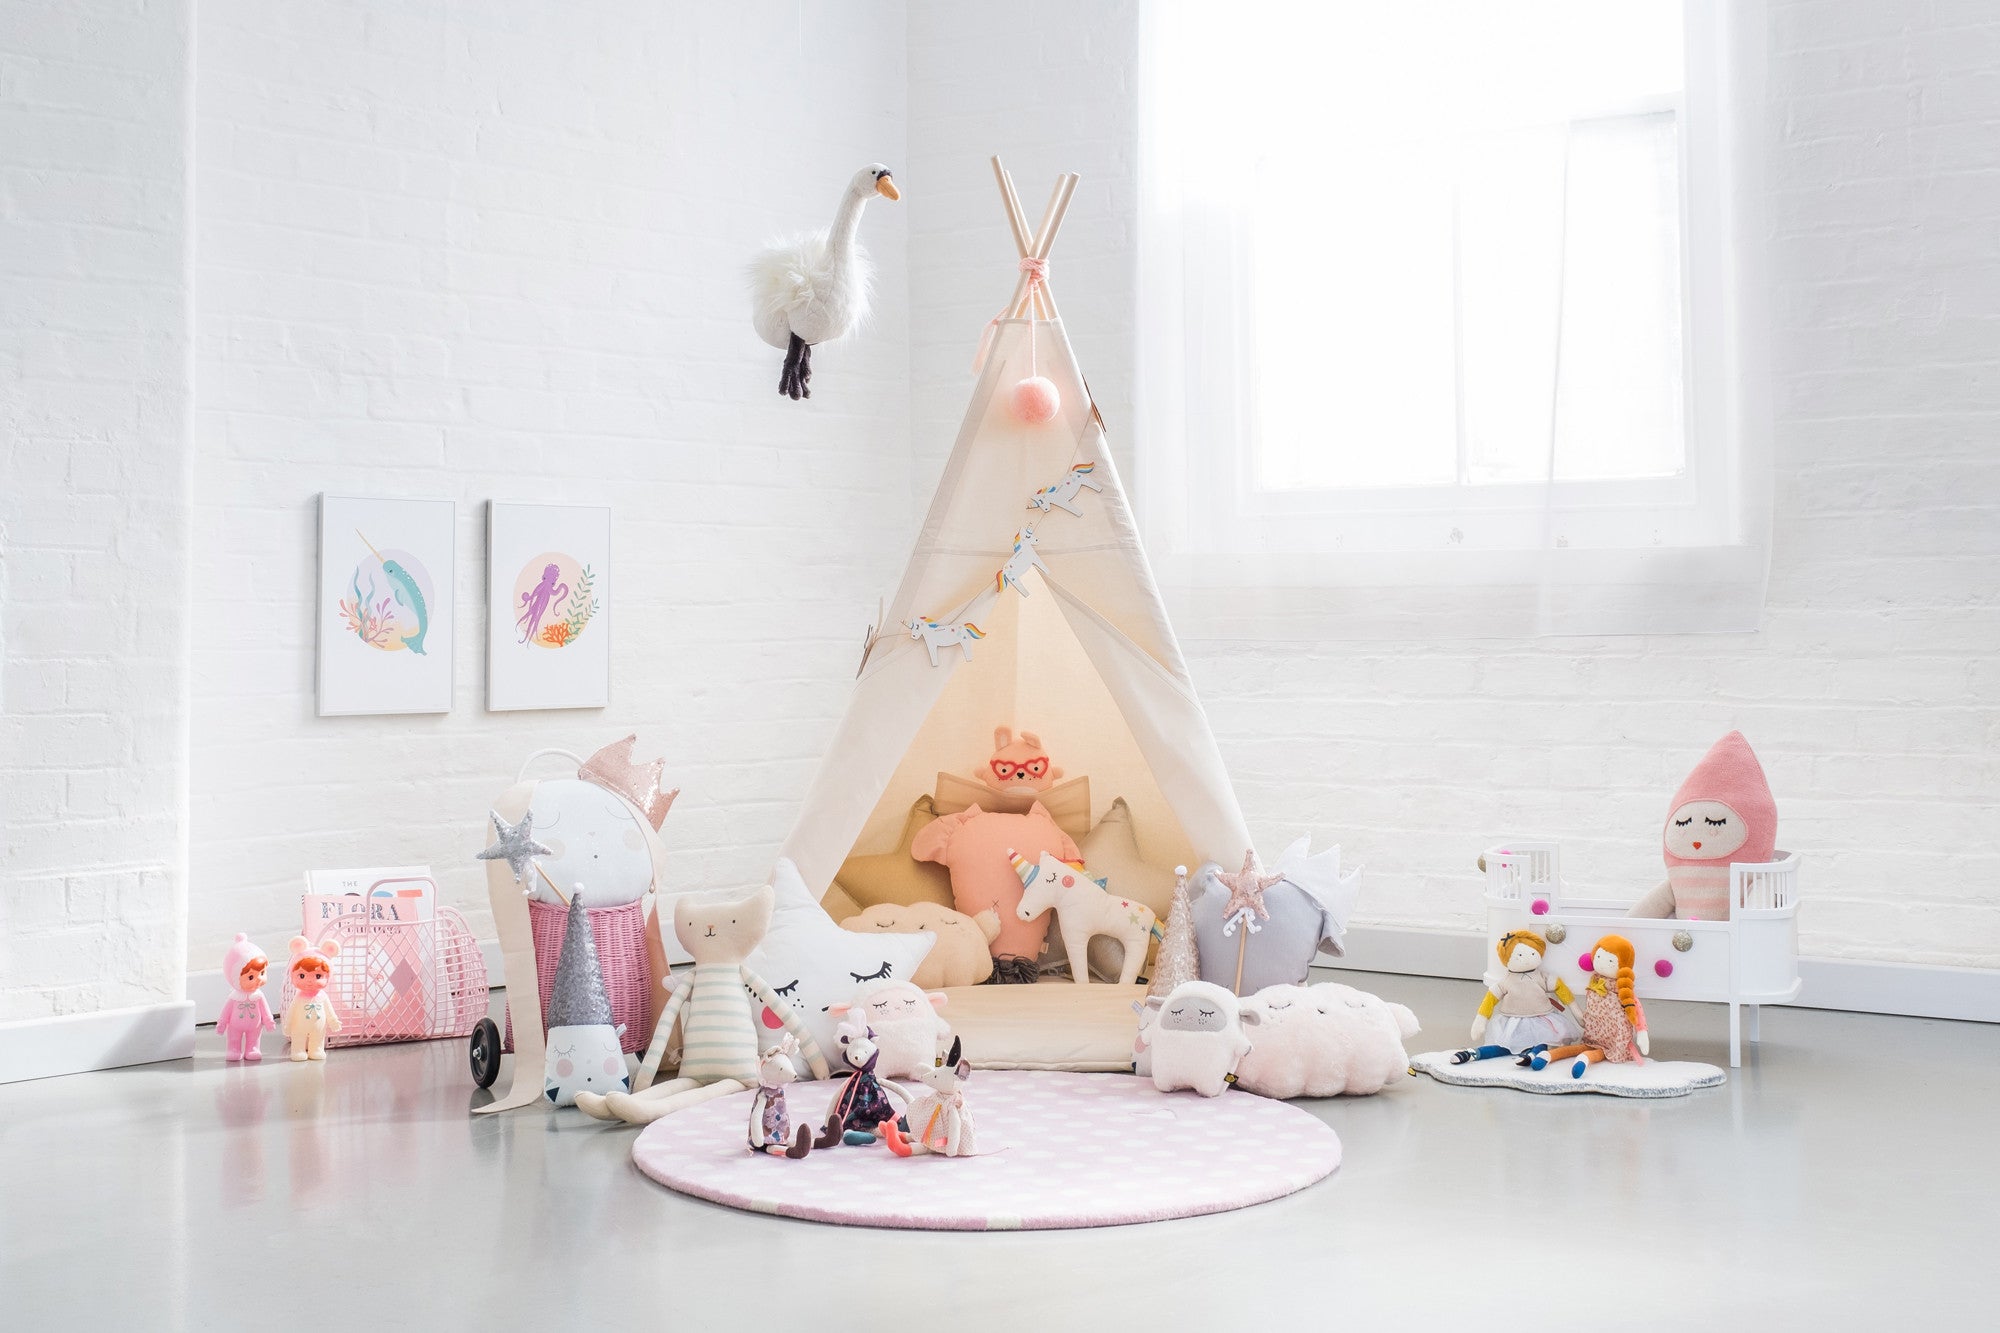 A Magic Tent children's bedroom styled by Bobby Rabbit.